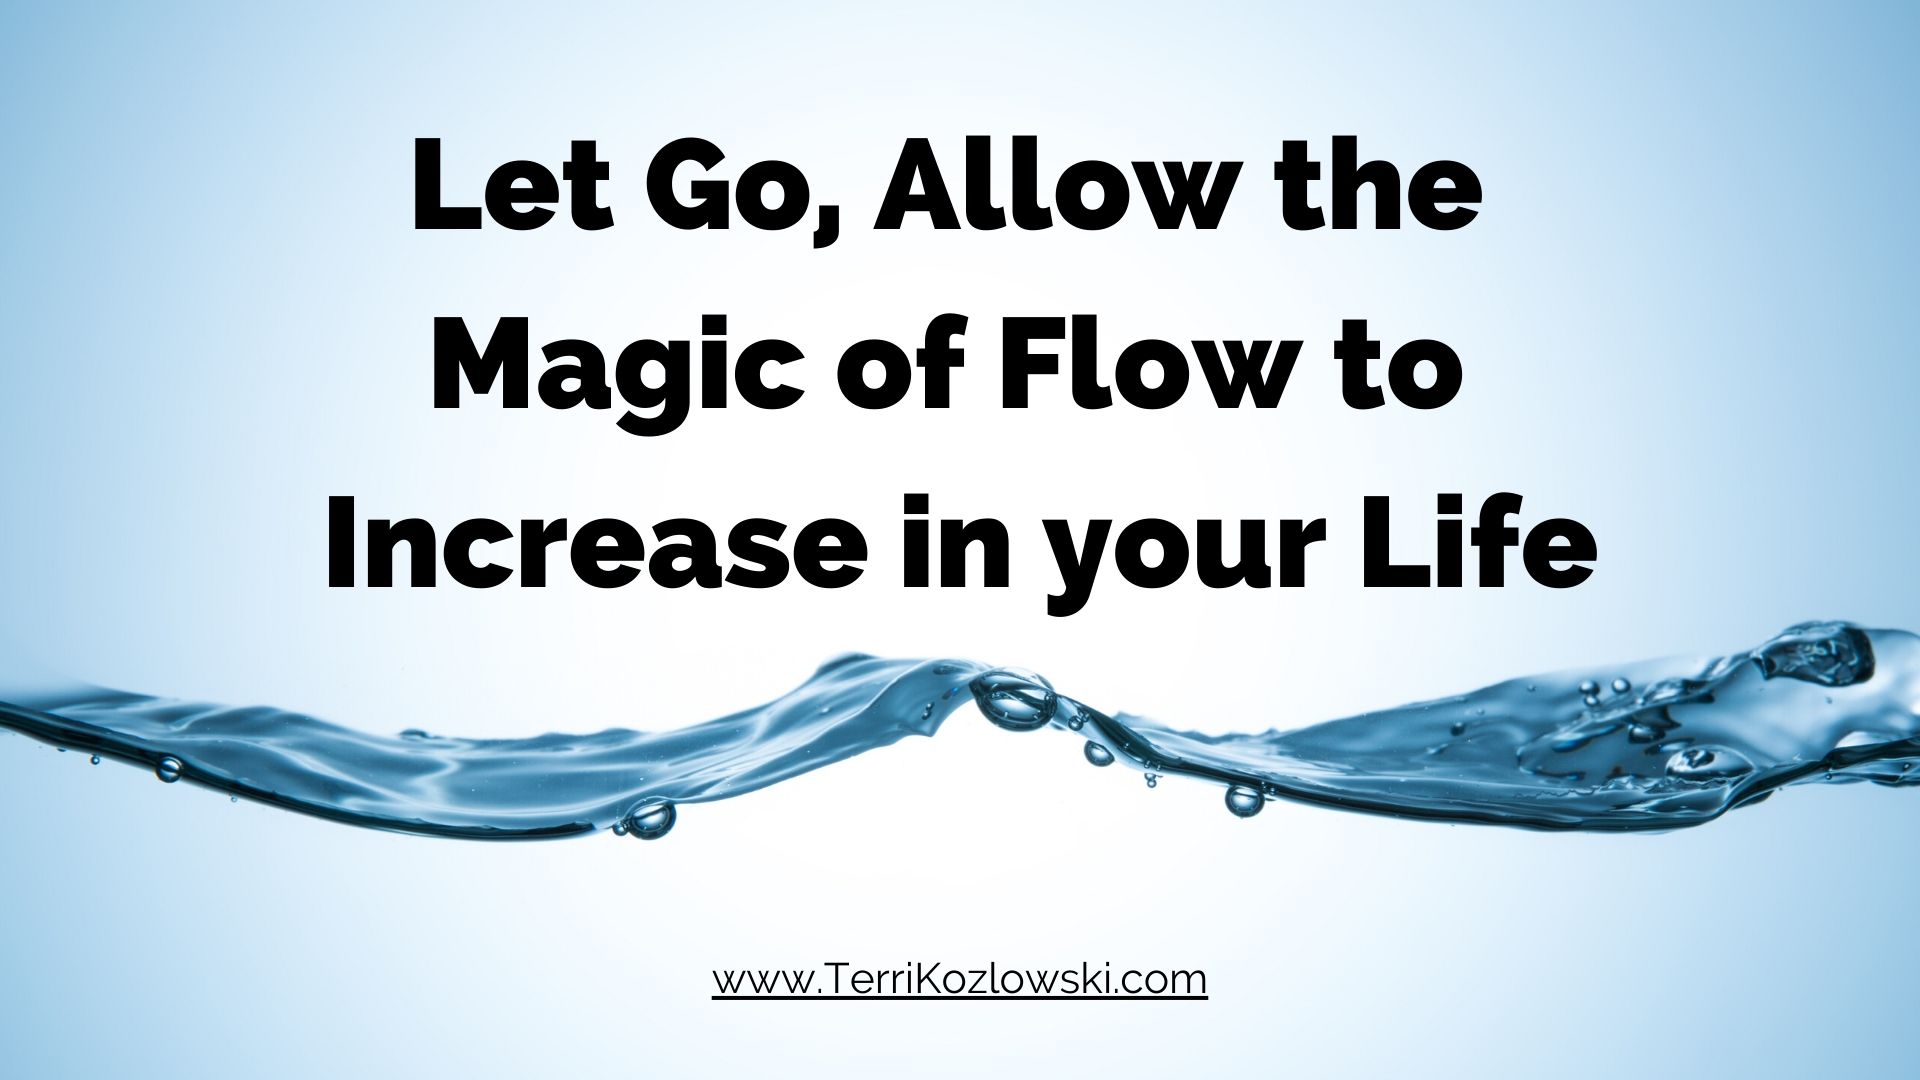 Release the Magic of Flow